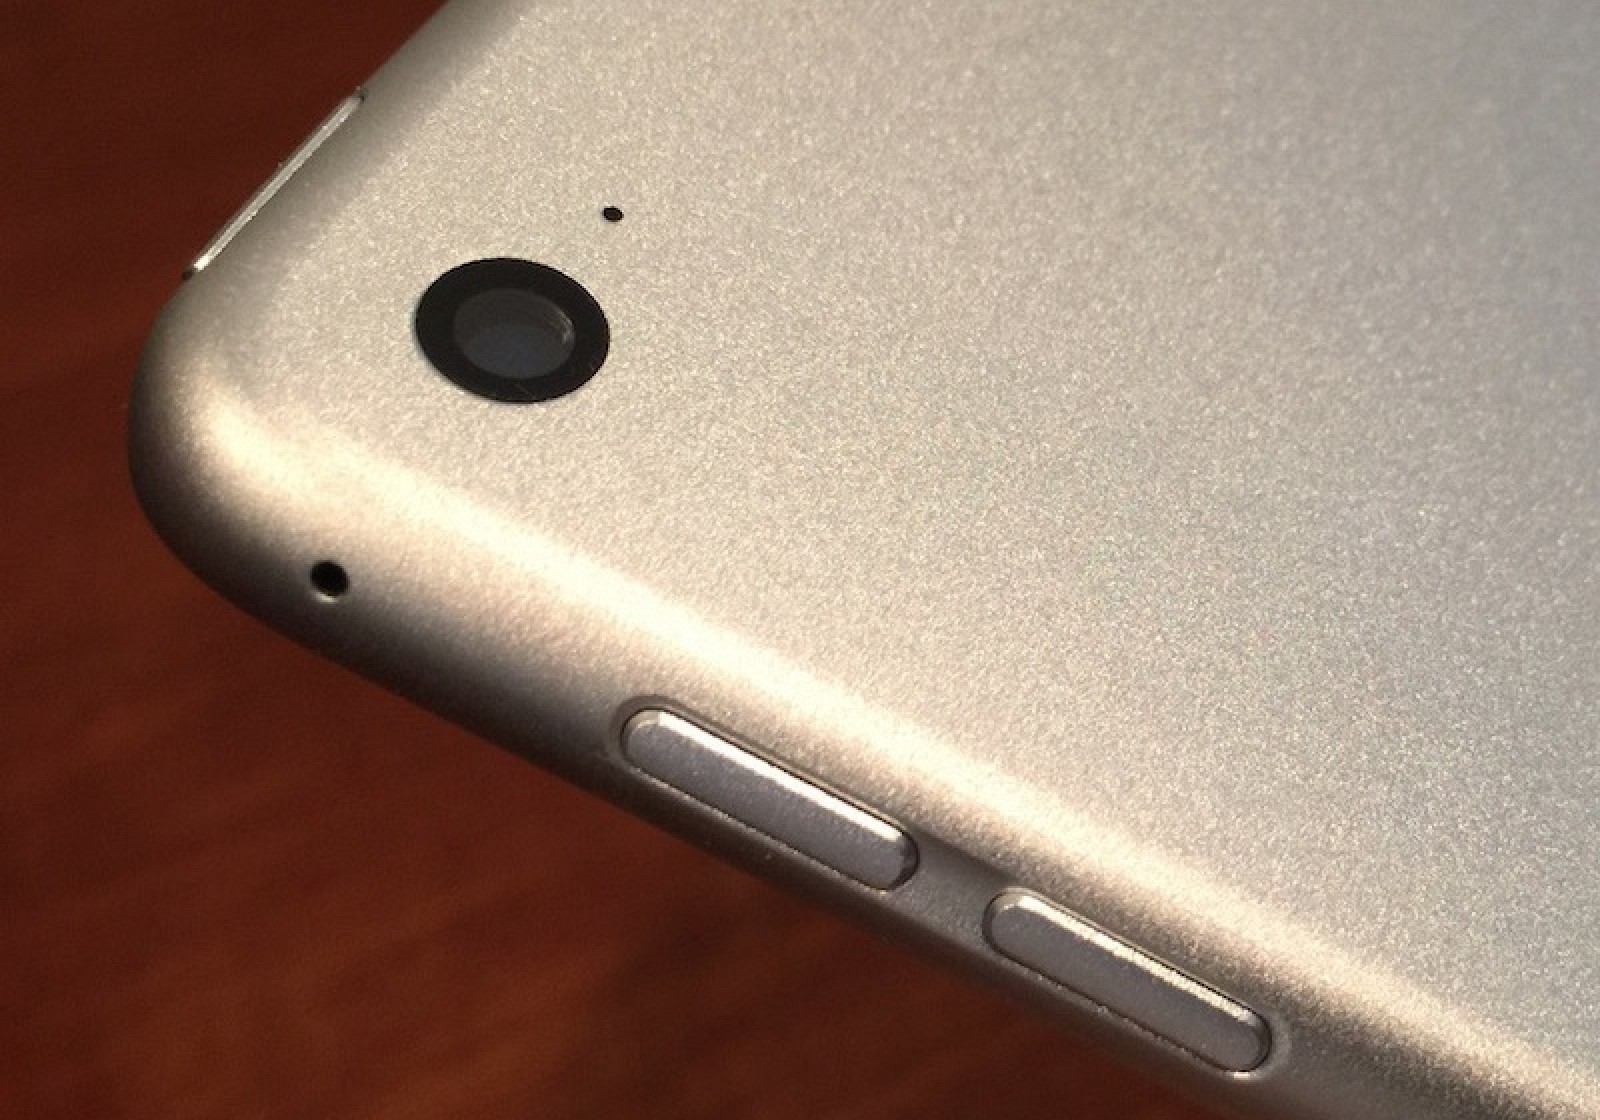 Detailed iPad Air 2 Claims Likely Based on Circulating Rumors, Not